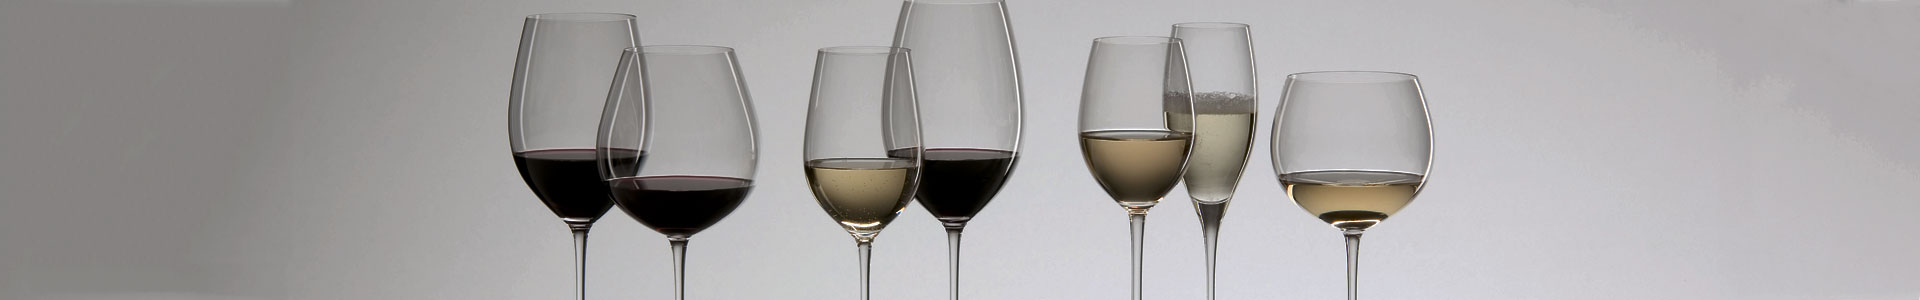 Wine glasses from Riedel in various sizes for white and red wines.